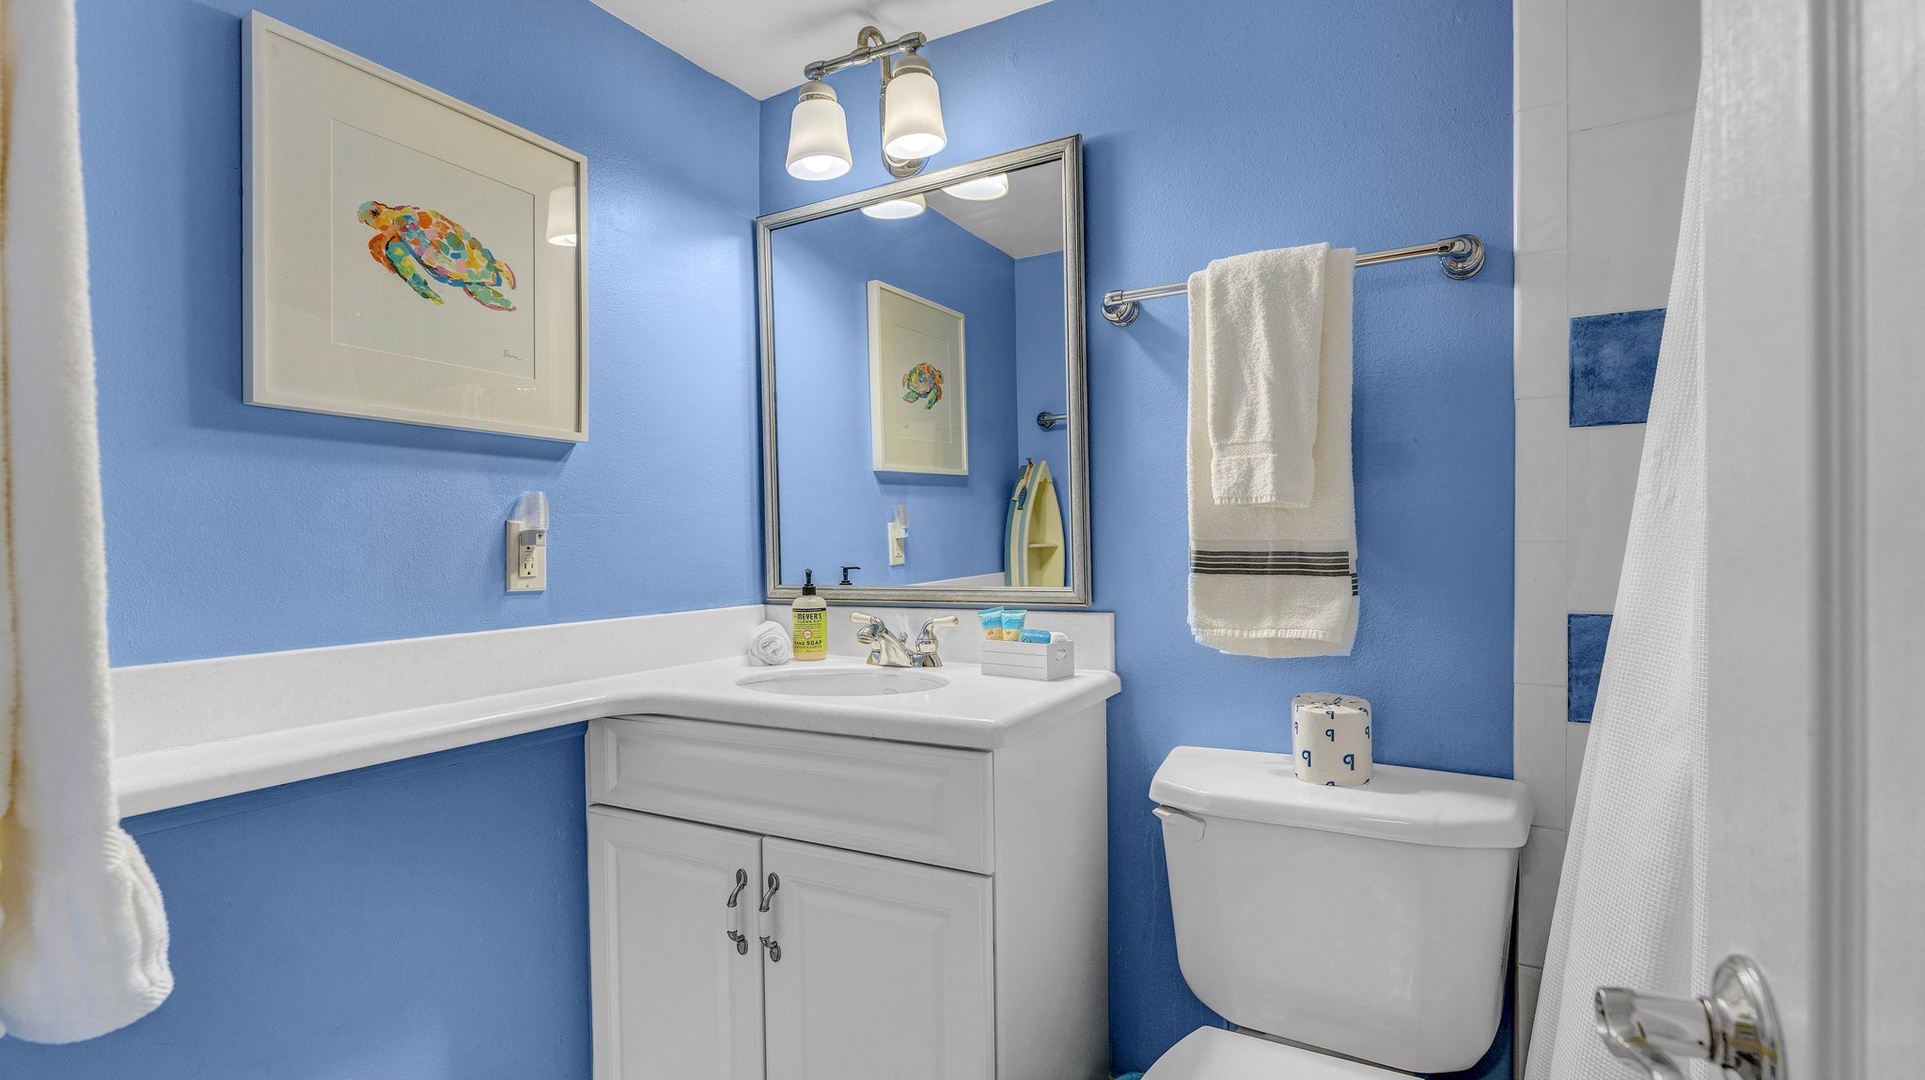 The shared 2nd floor bathroom offers a single vanity & shower/tub combo